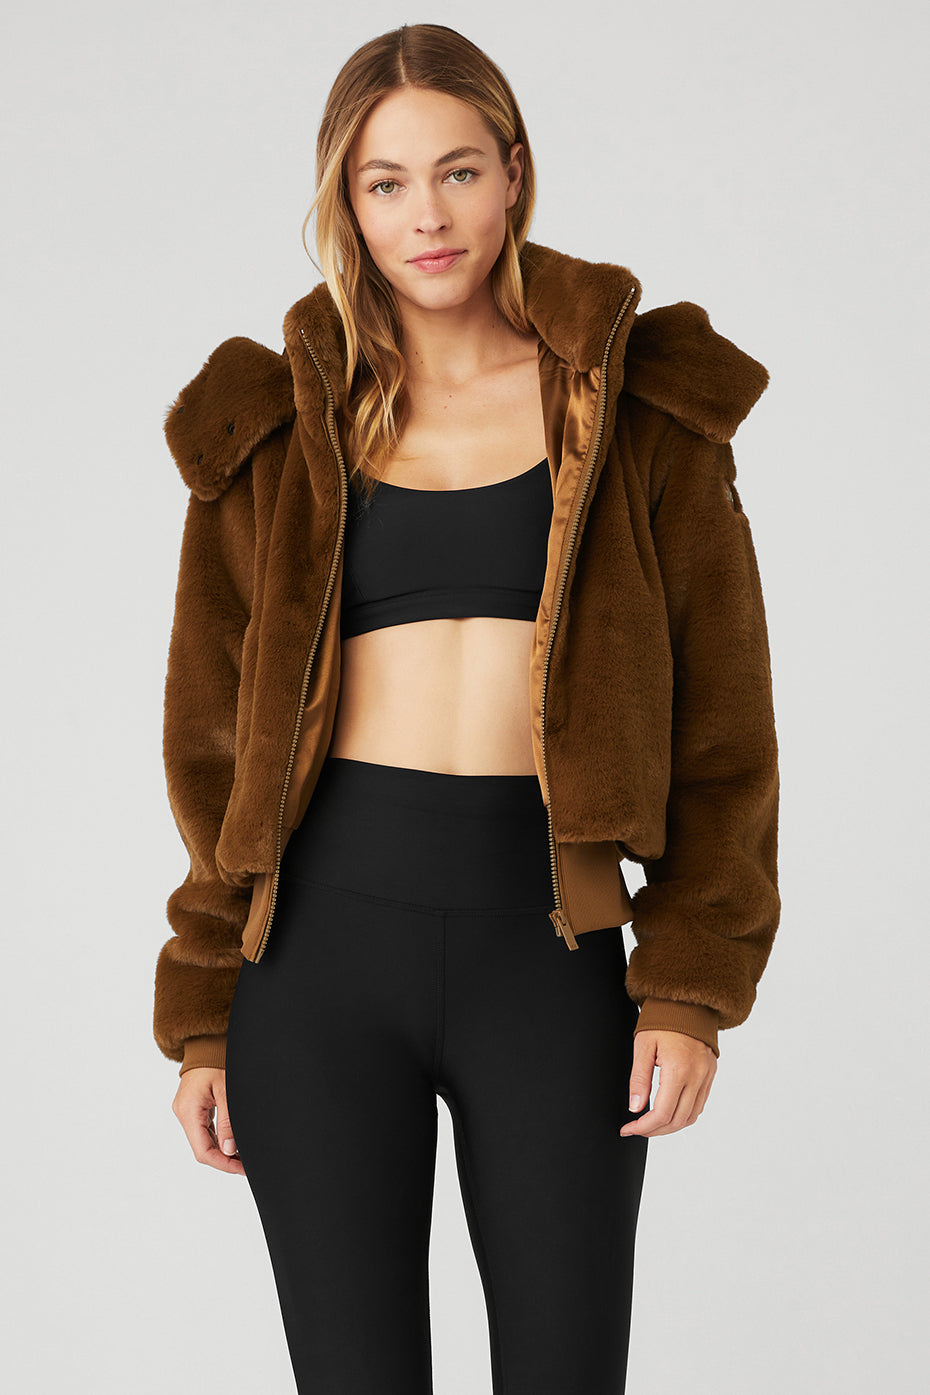 Alo Foxy Faux Fur Jacket  All Your Dream Workout Clothes Have